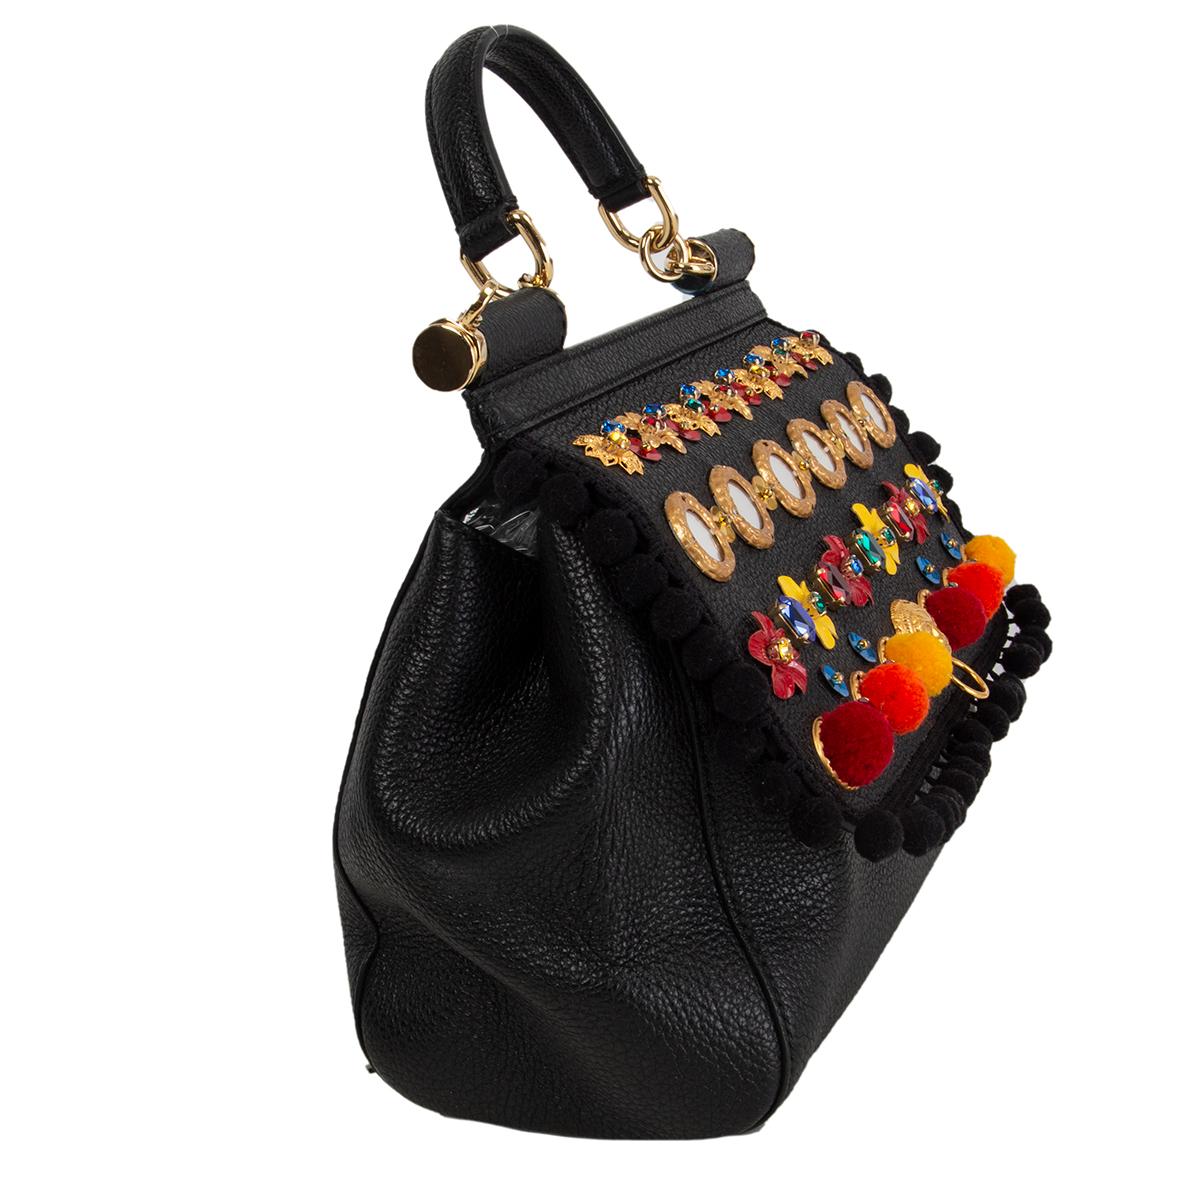 Dolce & Gabbana 'Medium Sicily' shoulder bag in black grained calfskin featuring emblems, crystals, flowers, majolica ceramic, lion head and pom-pom embellishments arounf the trim. Opens with with two magnetic buttons under the flap and ins lined in